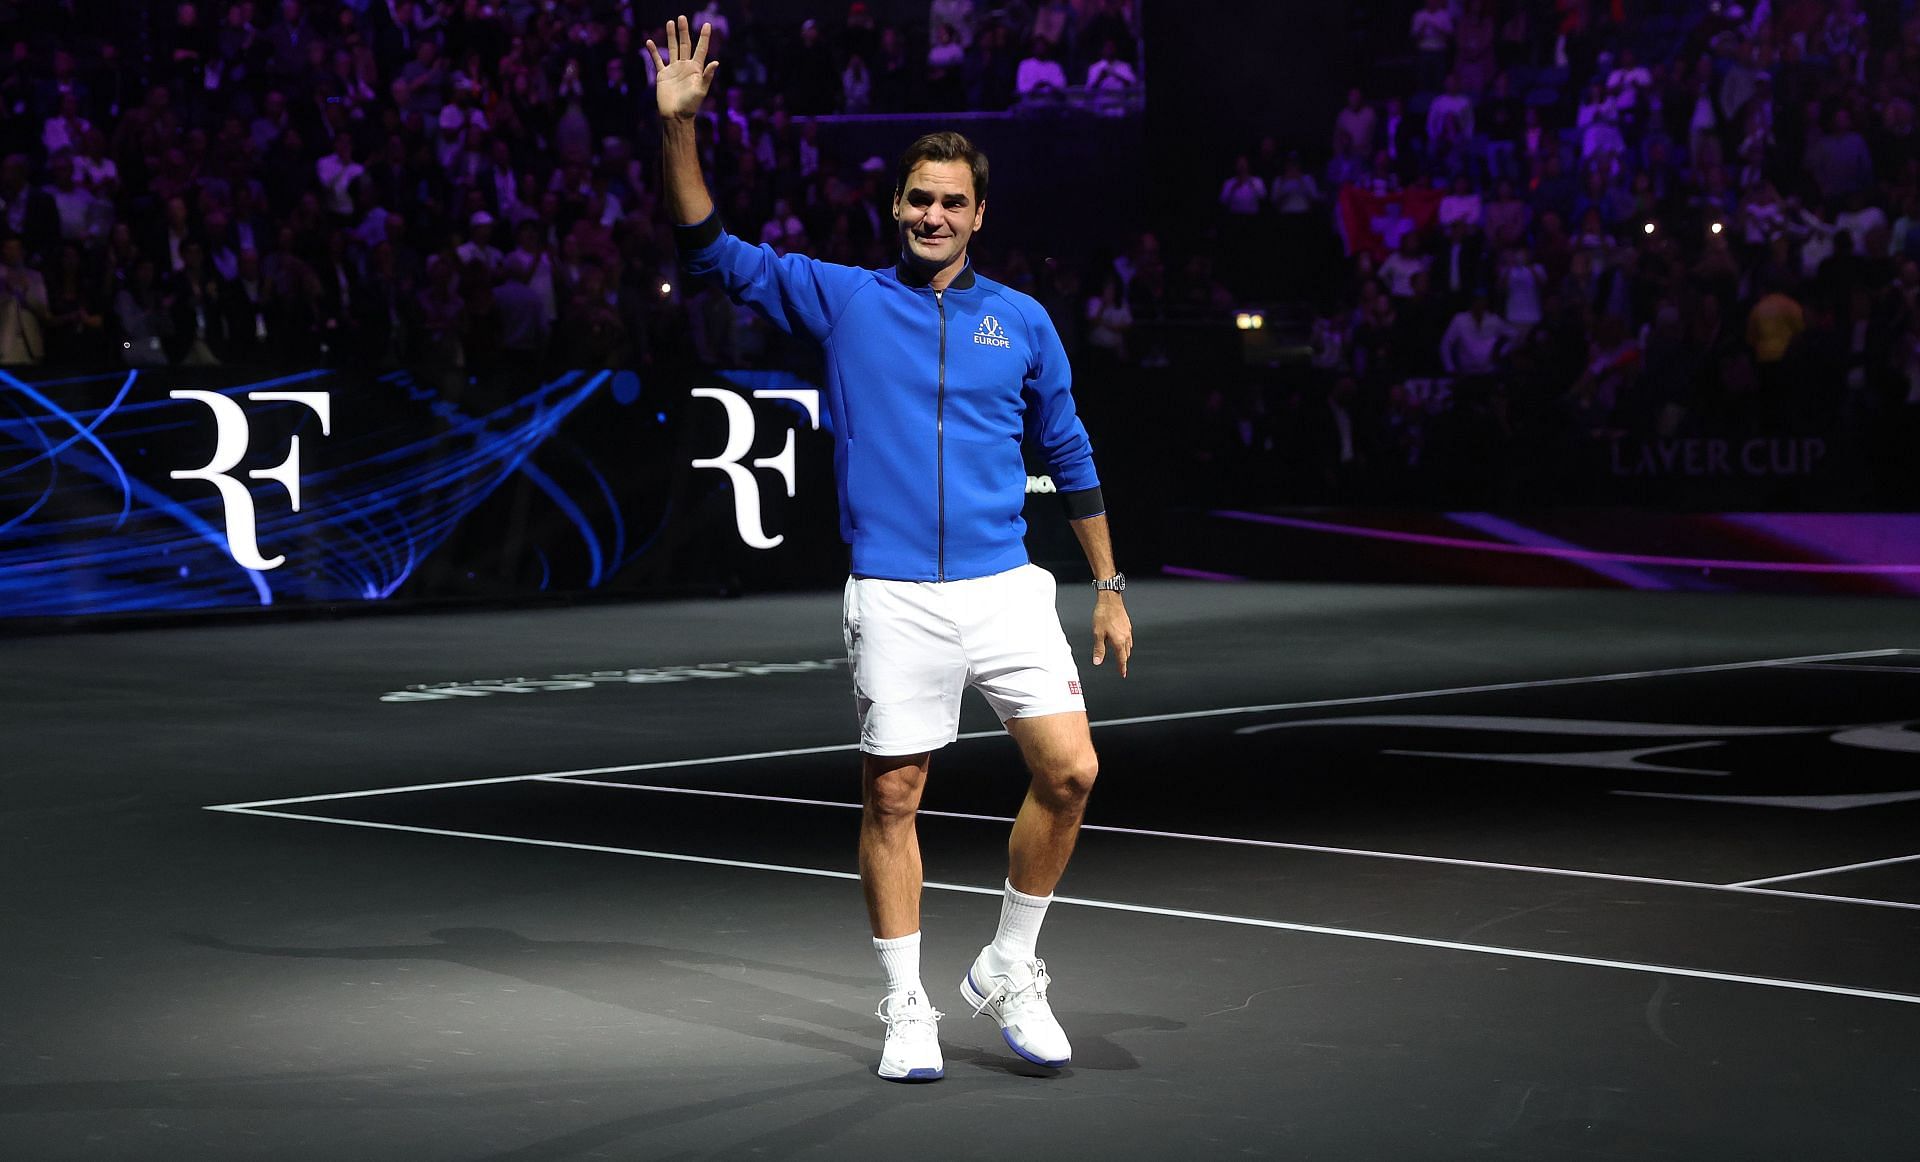 Roger Federer acknowledges the crowd during his farewell at the 2022 Laver Cup